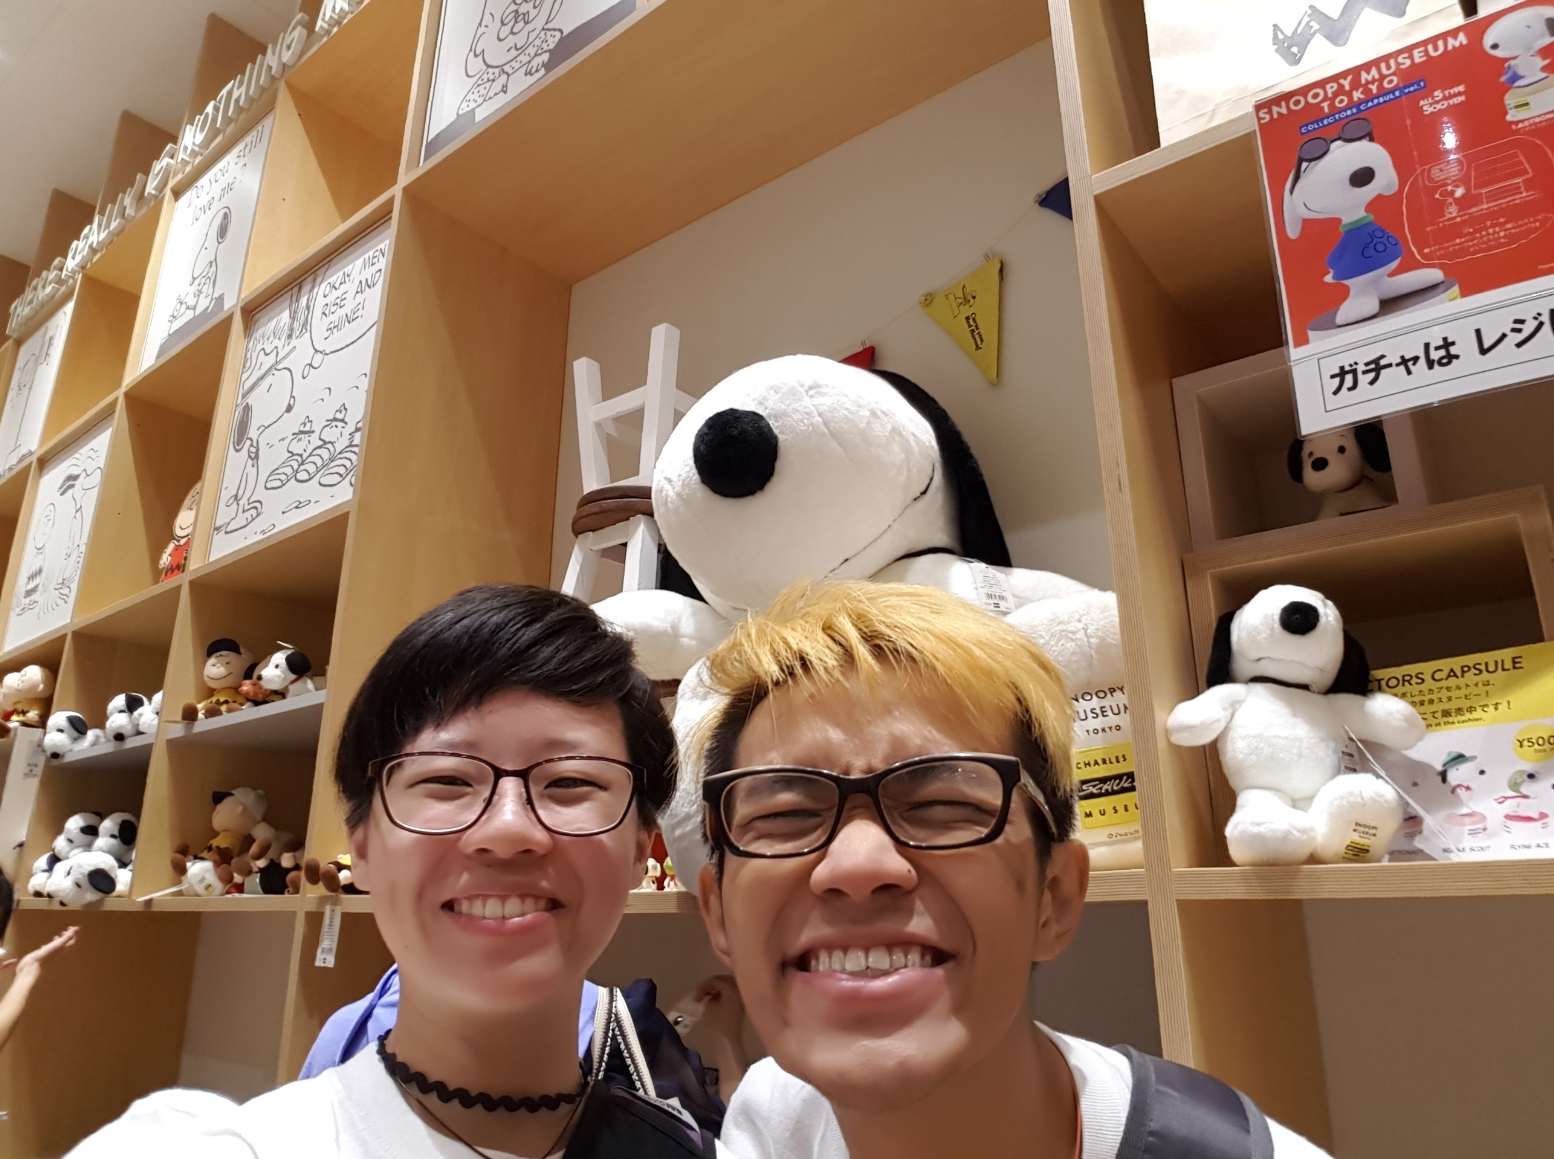 TacoCat’s Travels #75 (Japan 2.0): Shopping at Snoopy Museum! 🐶